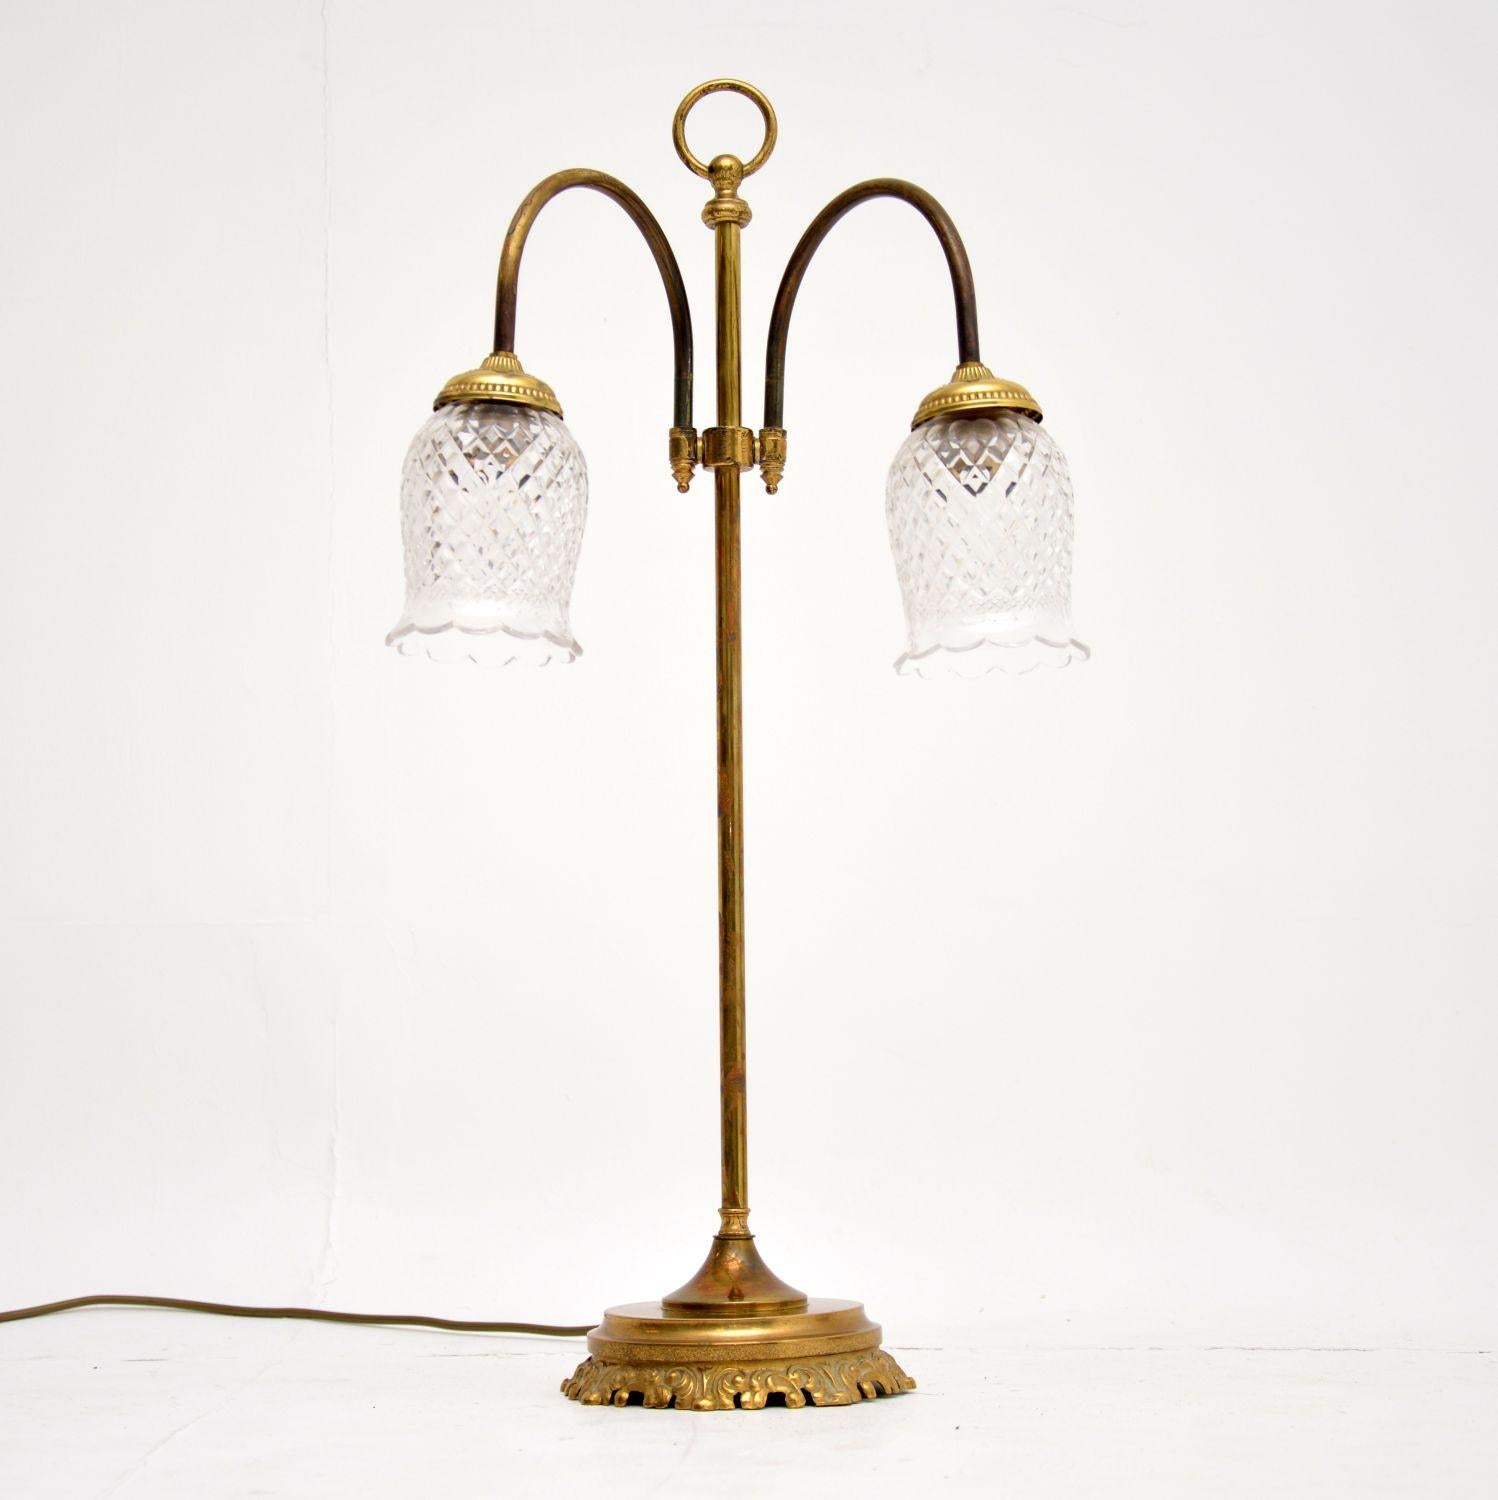 A beautiful and high quality vintage table lamp in brass and cut crystal glass. This dates from circa 1950s, it is in lovely original condition. The two brass arms can swivel and rotate to angle the light given off. The cut glass shades are